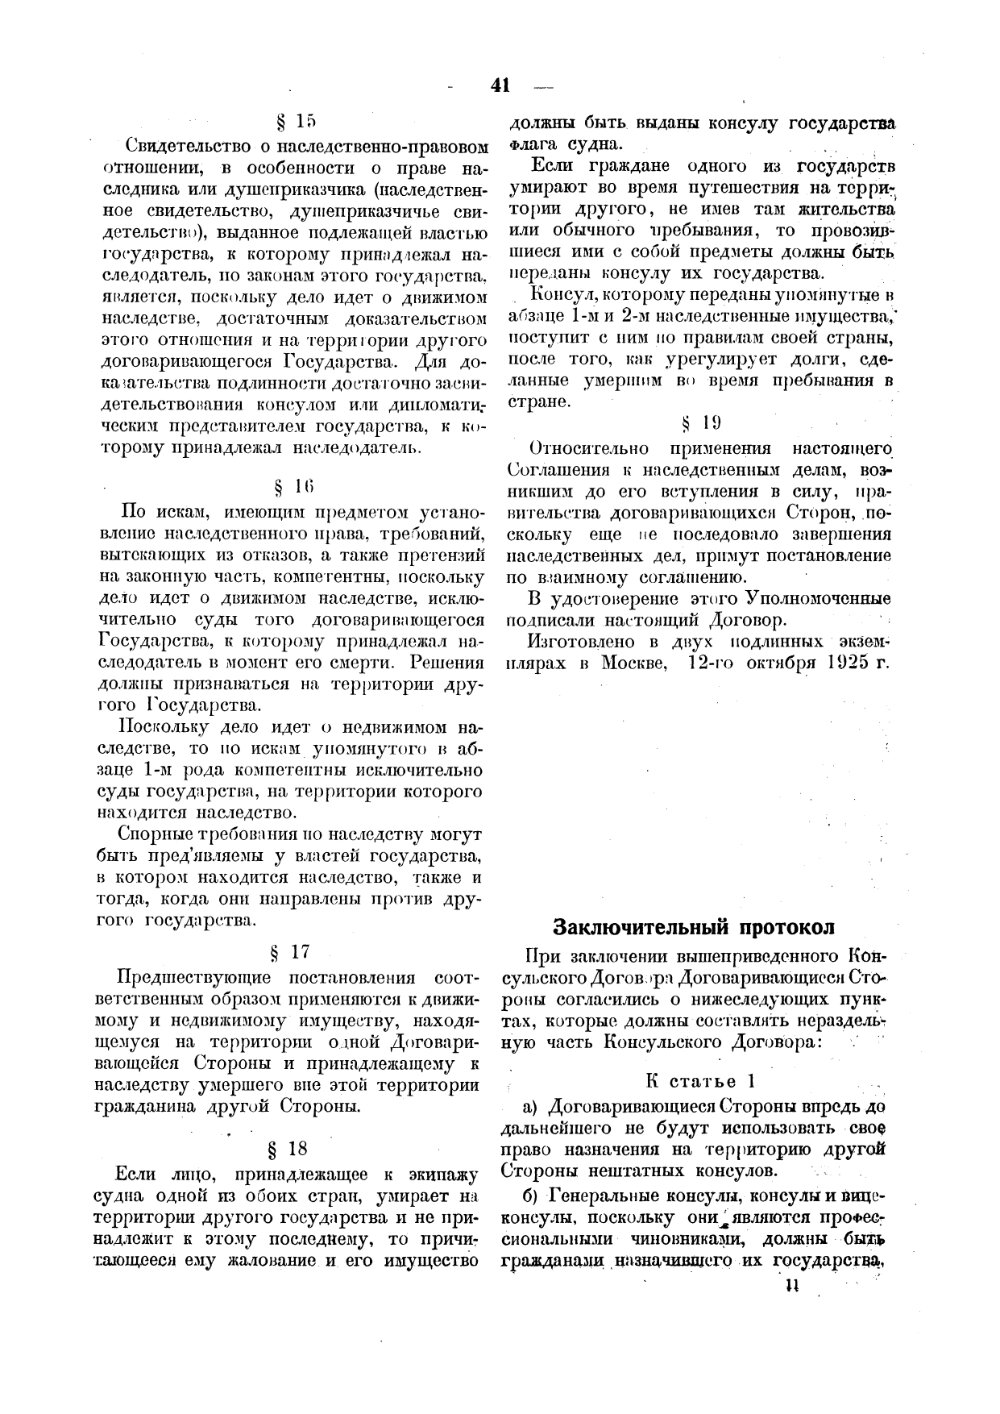 Scan of page 41